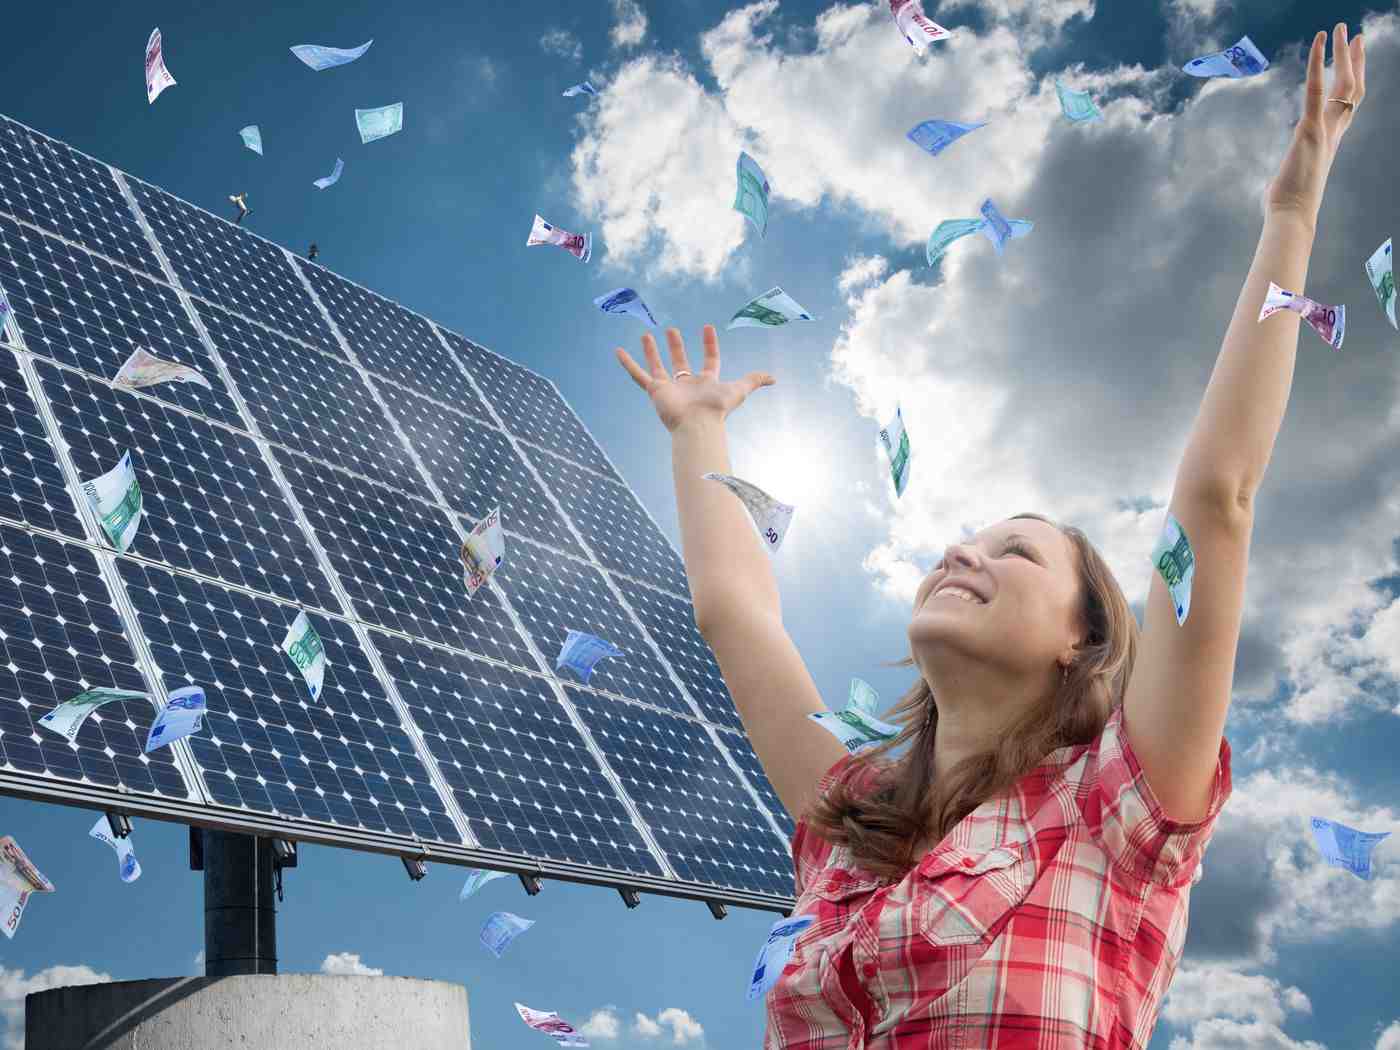 How do I get low cost solar panels?